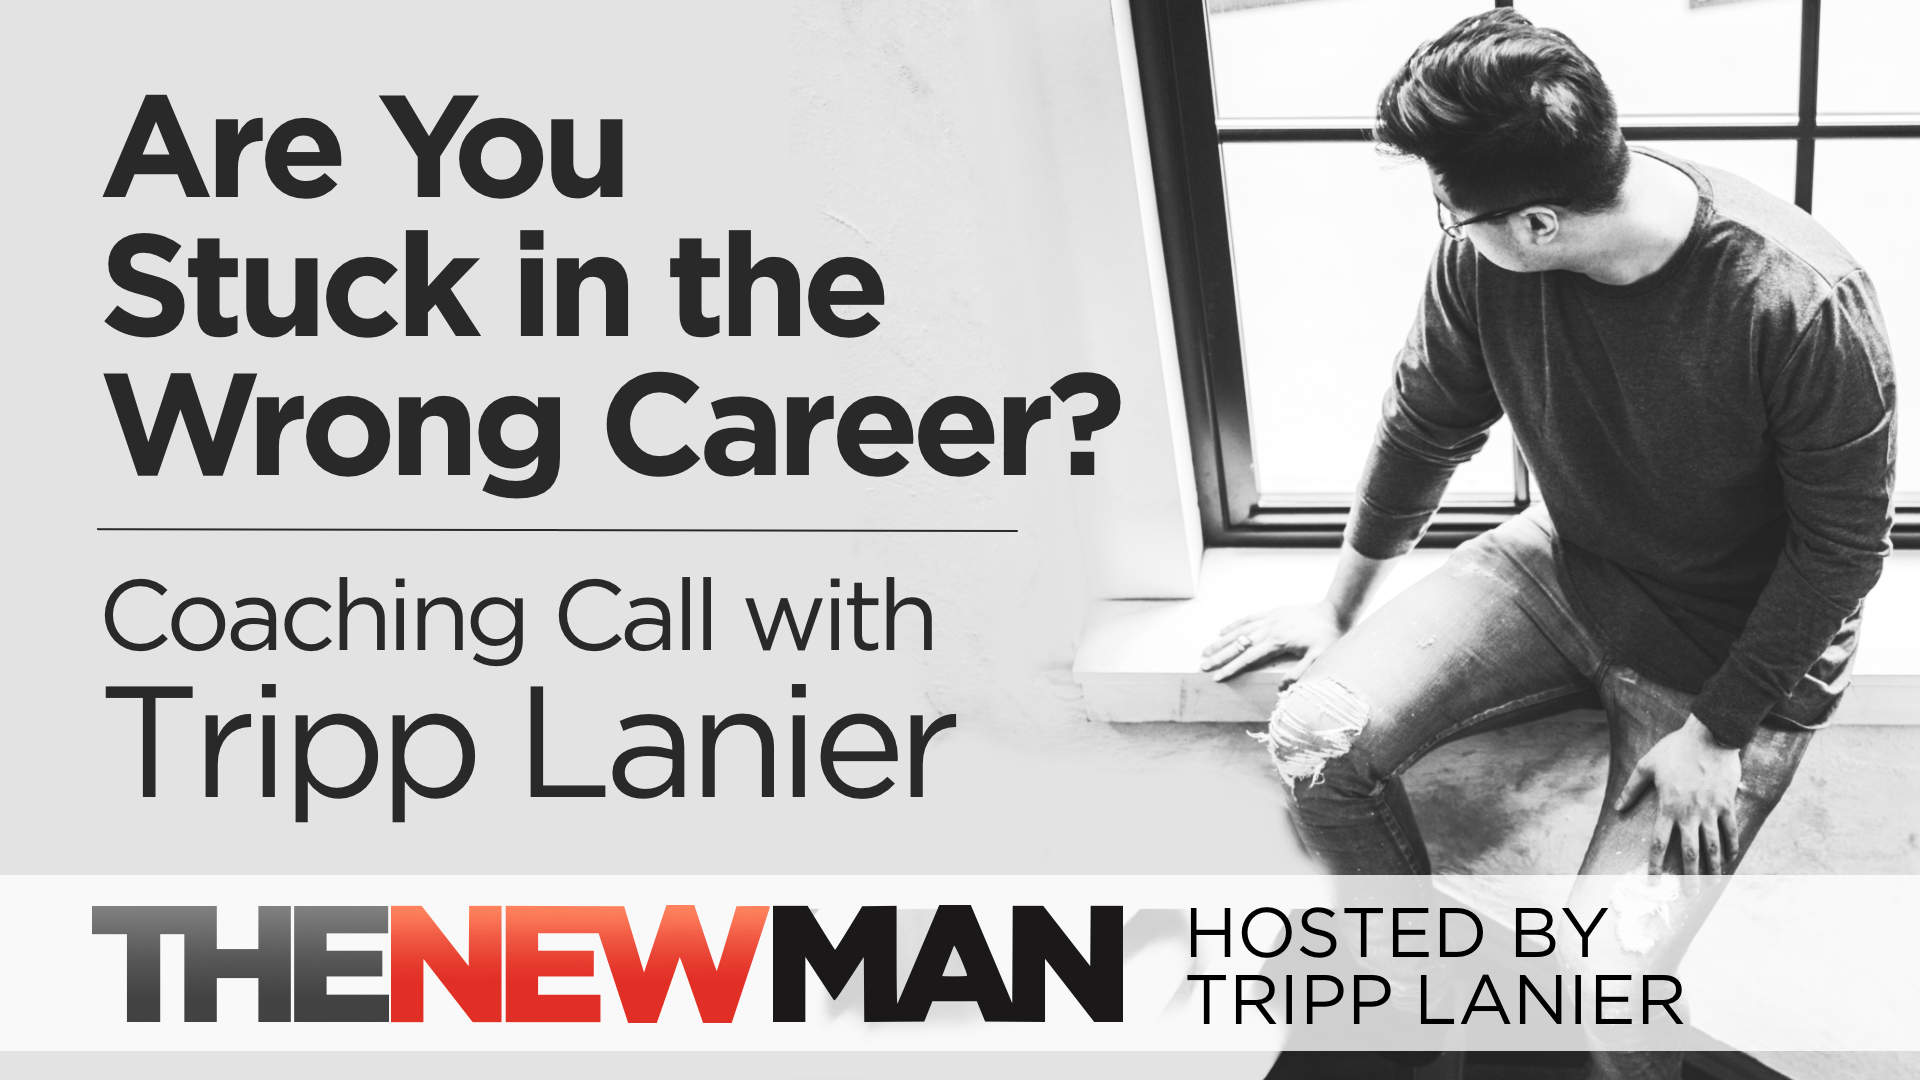 Am I Stuck in the Wrong Career? — Coaching Call with Tripp Lanier